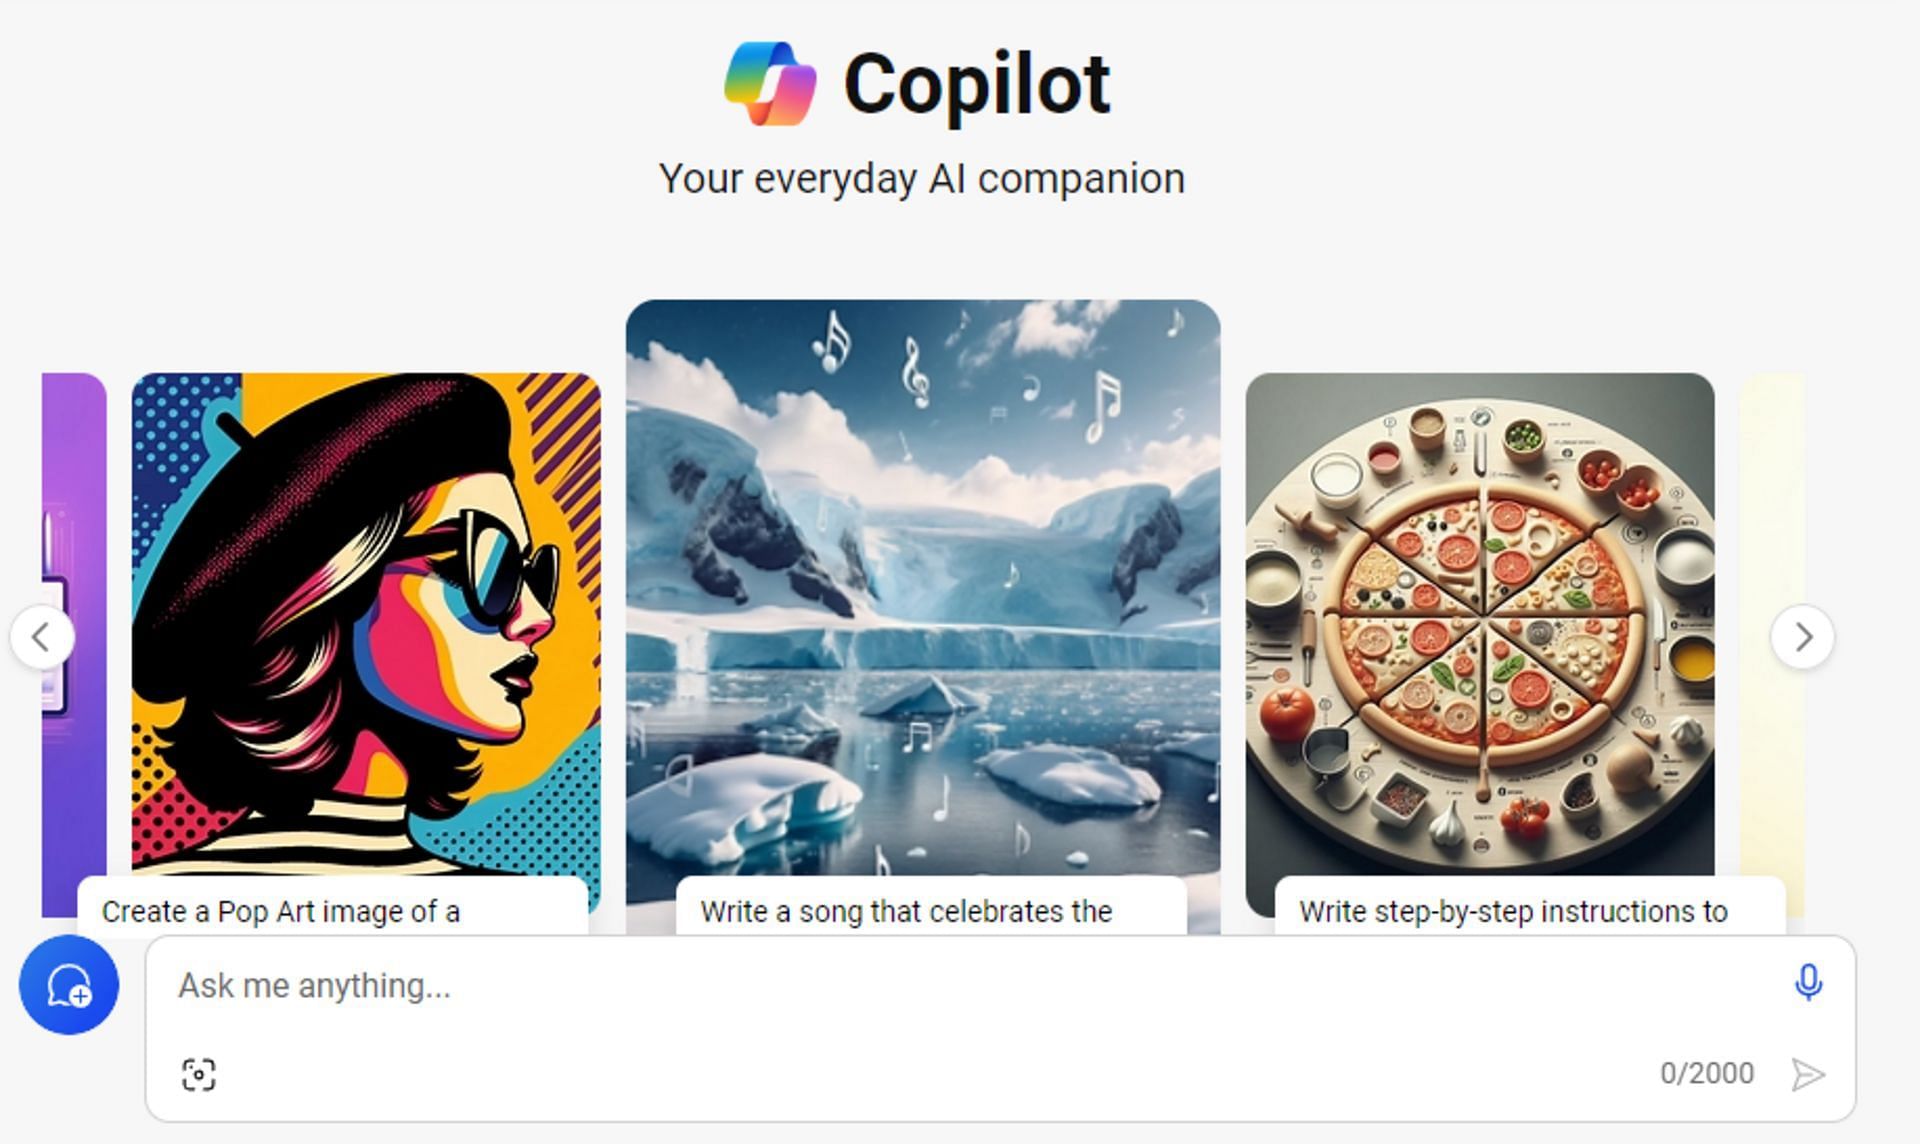 Copilot is one of the most complete and best AI Chatbots. (Image via Copilot/Microsoft)